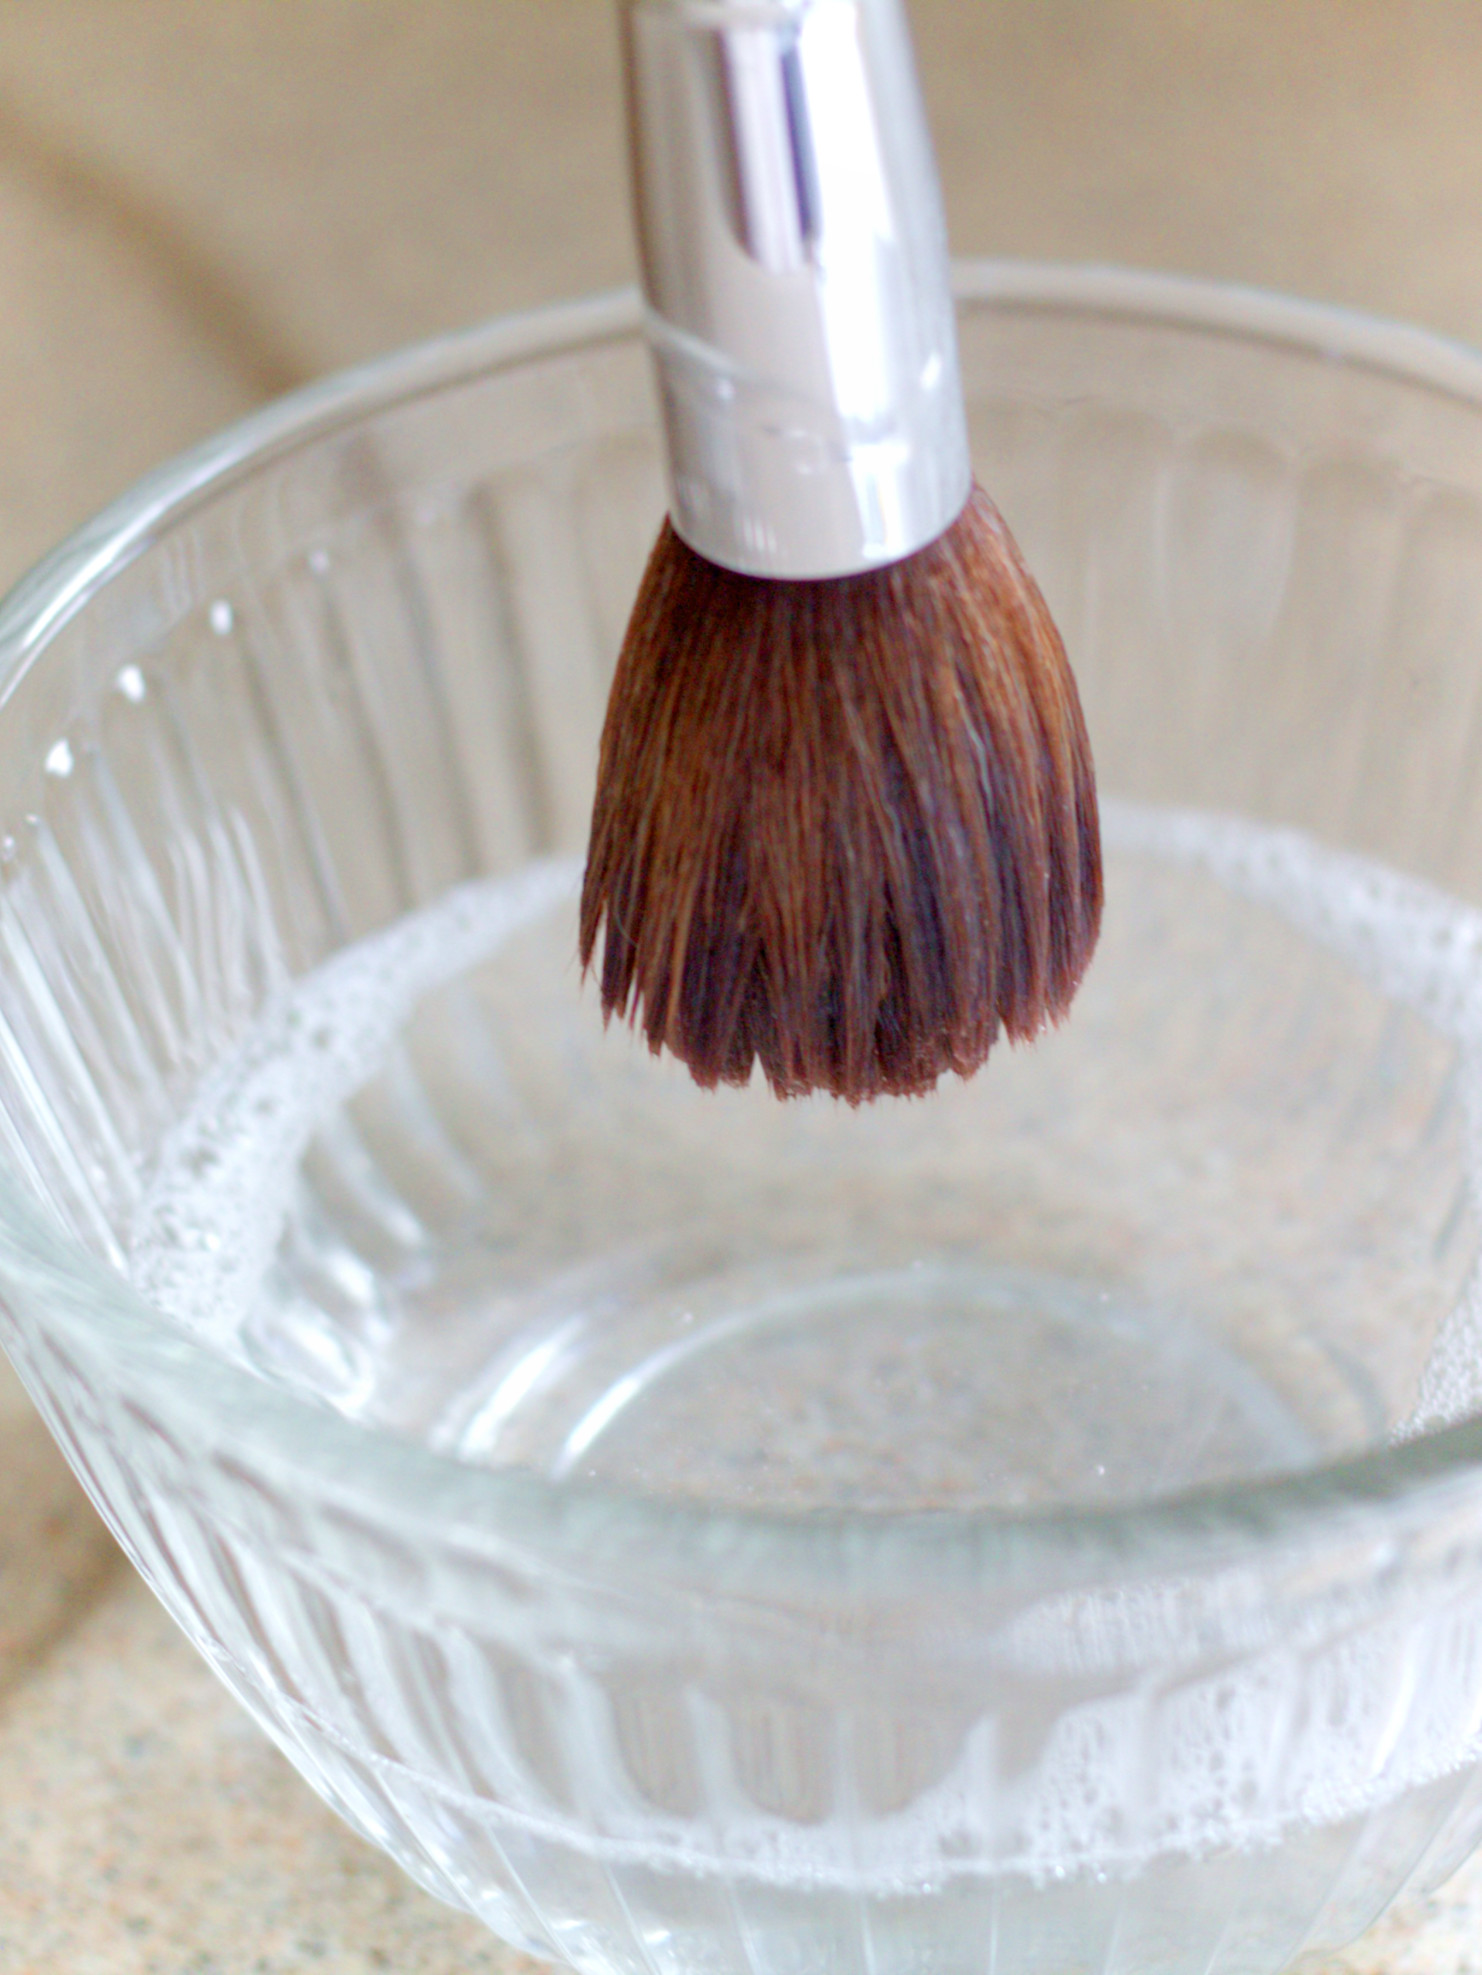 How To Clean Your Makeup Brushes - Staring With Soapy Water